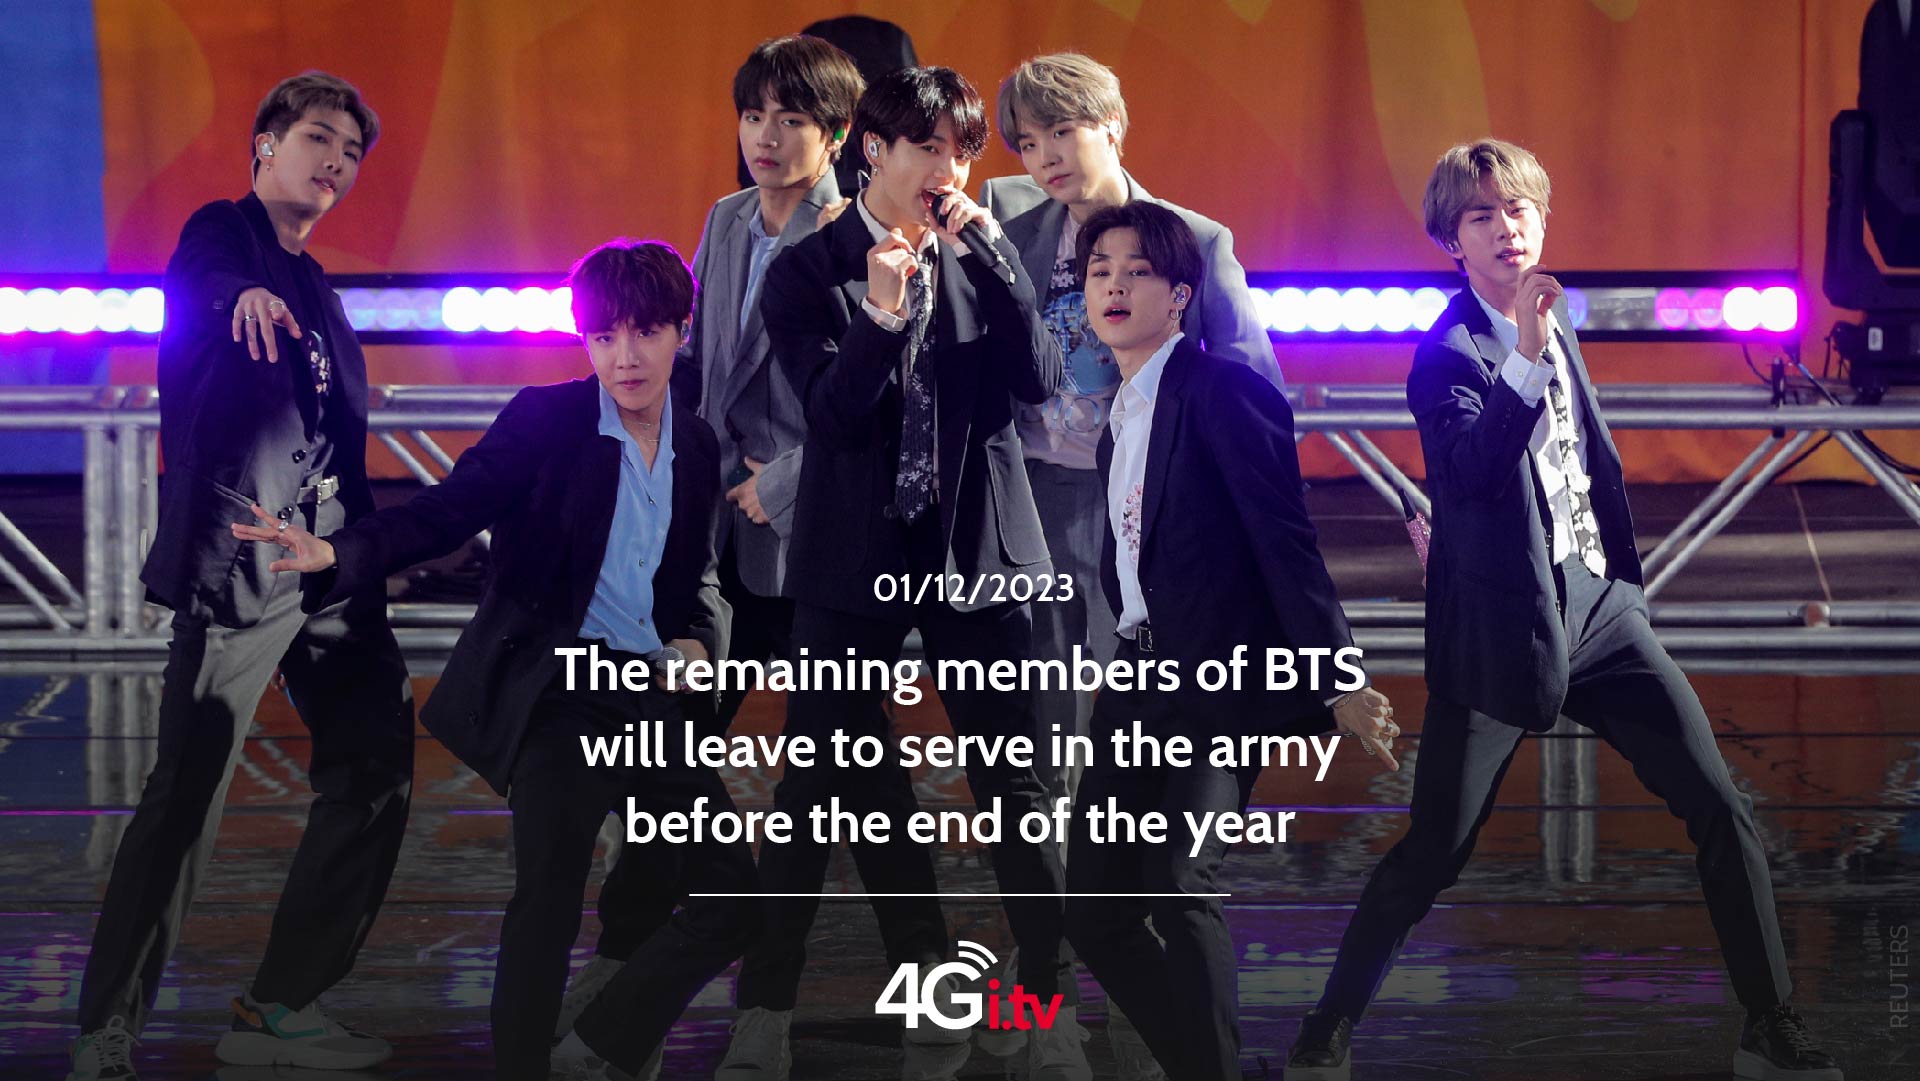 Подробнее о статье The remaining members of BTS will leave to serve in the army before the end of the year